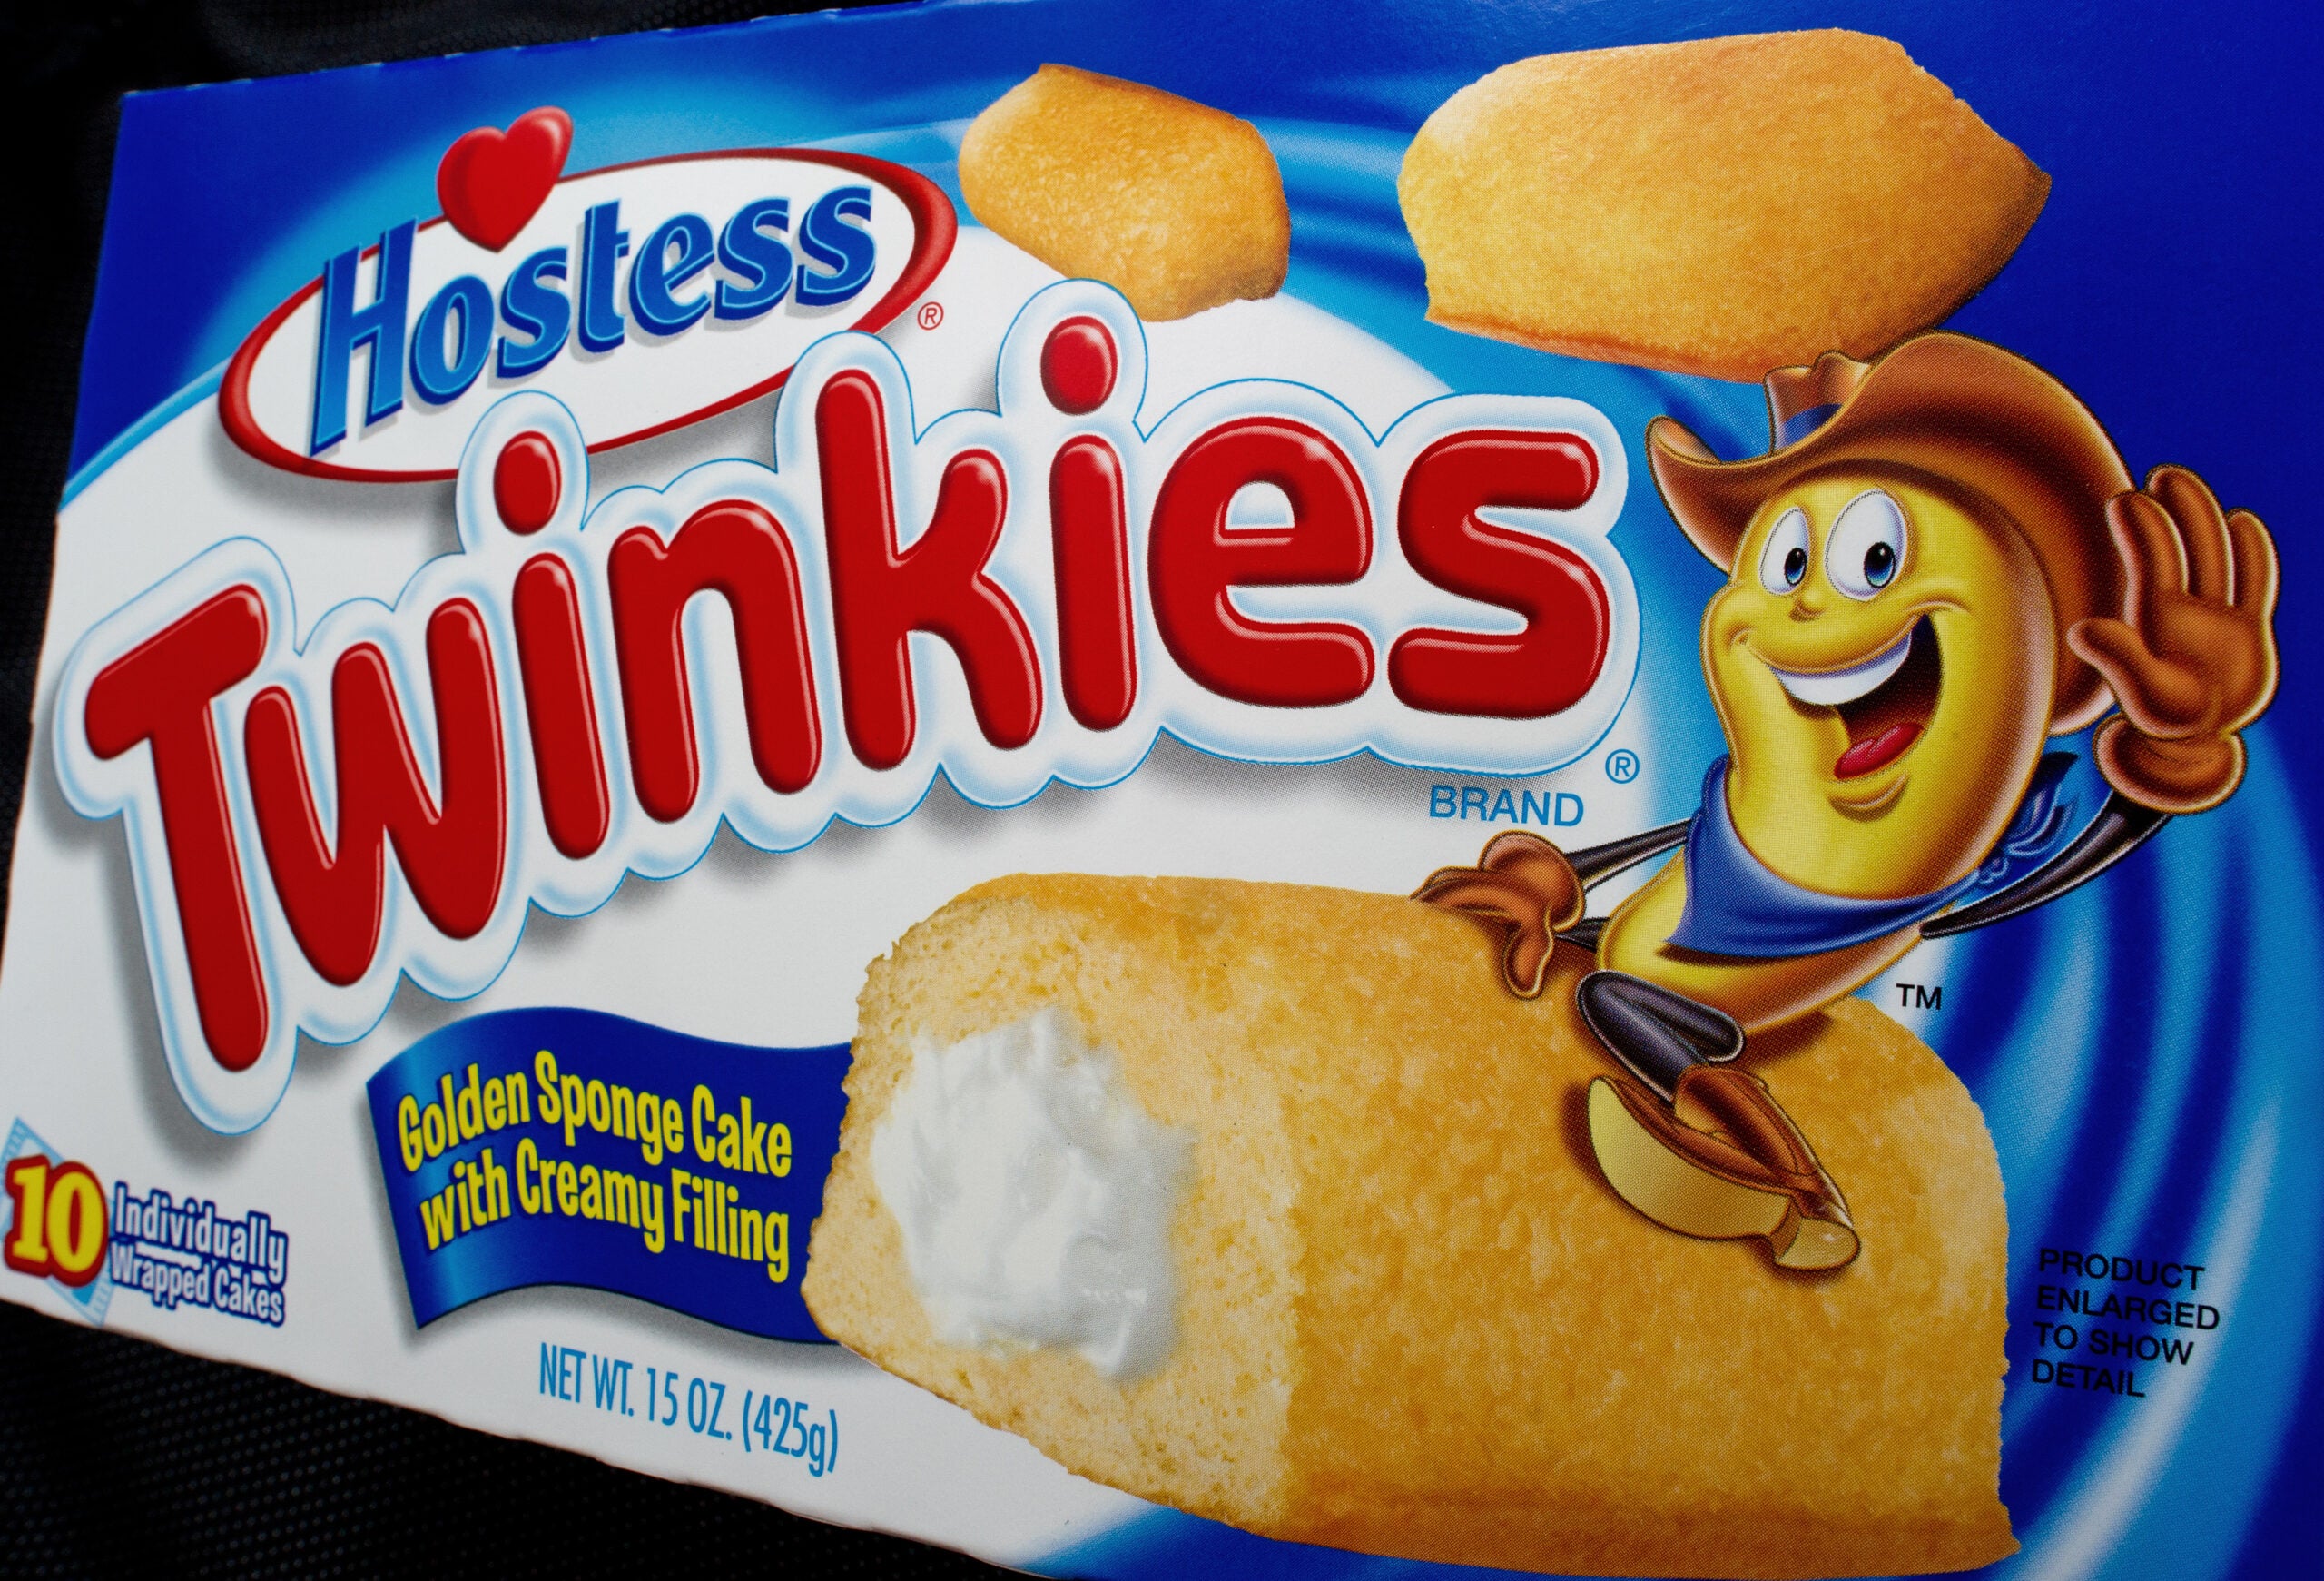 What Are The Creamy Centers Of Twinkies Made Of?